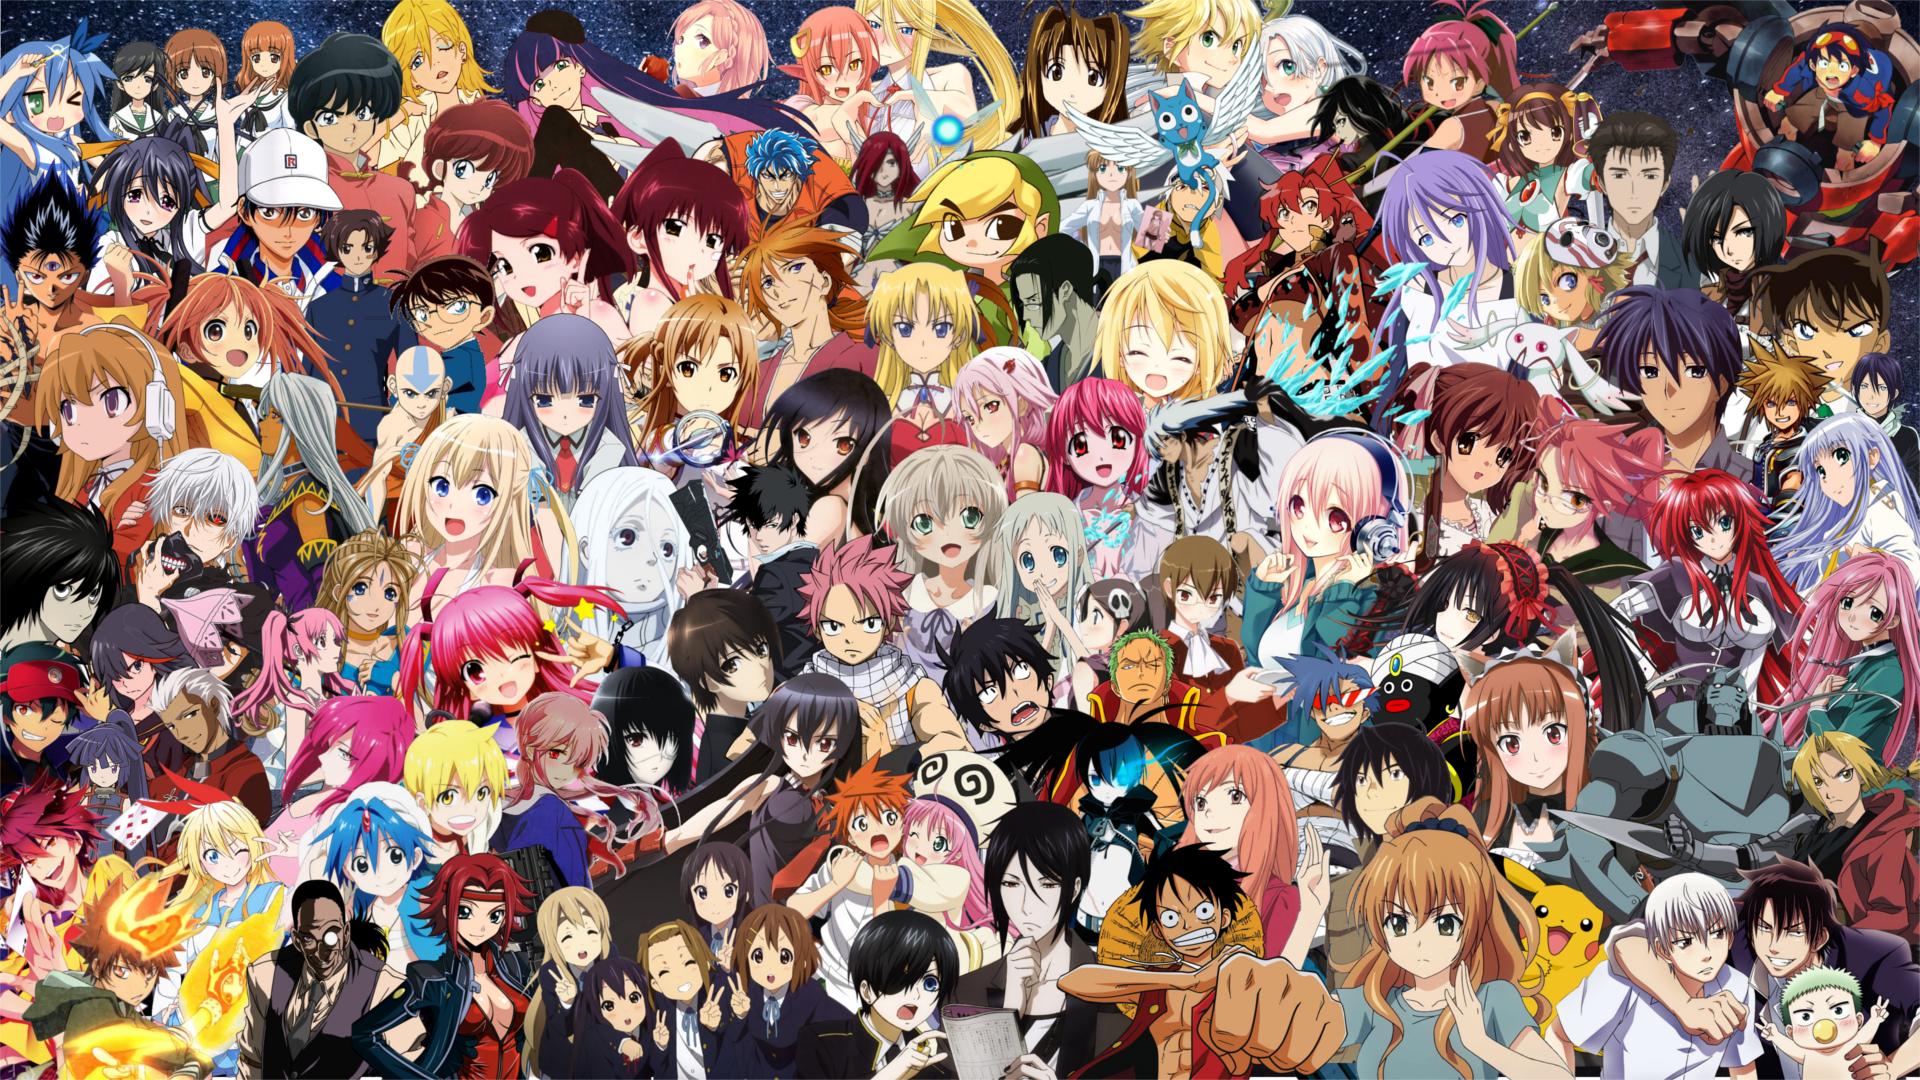 1920 x 1080 · png - Anime Collage 1920x1080 Wallpapers - Wallpaper Cave